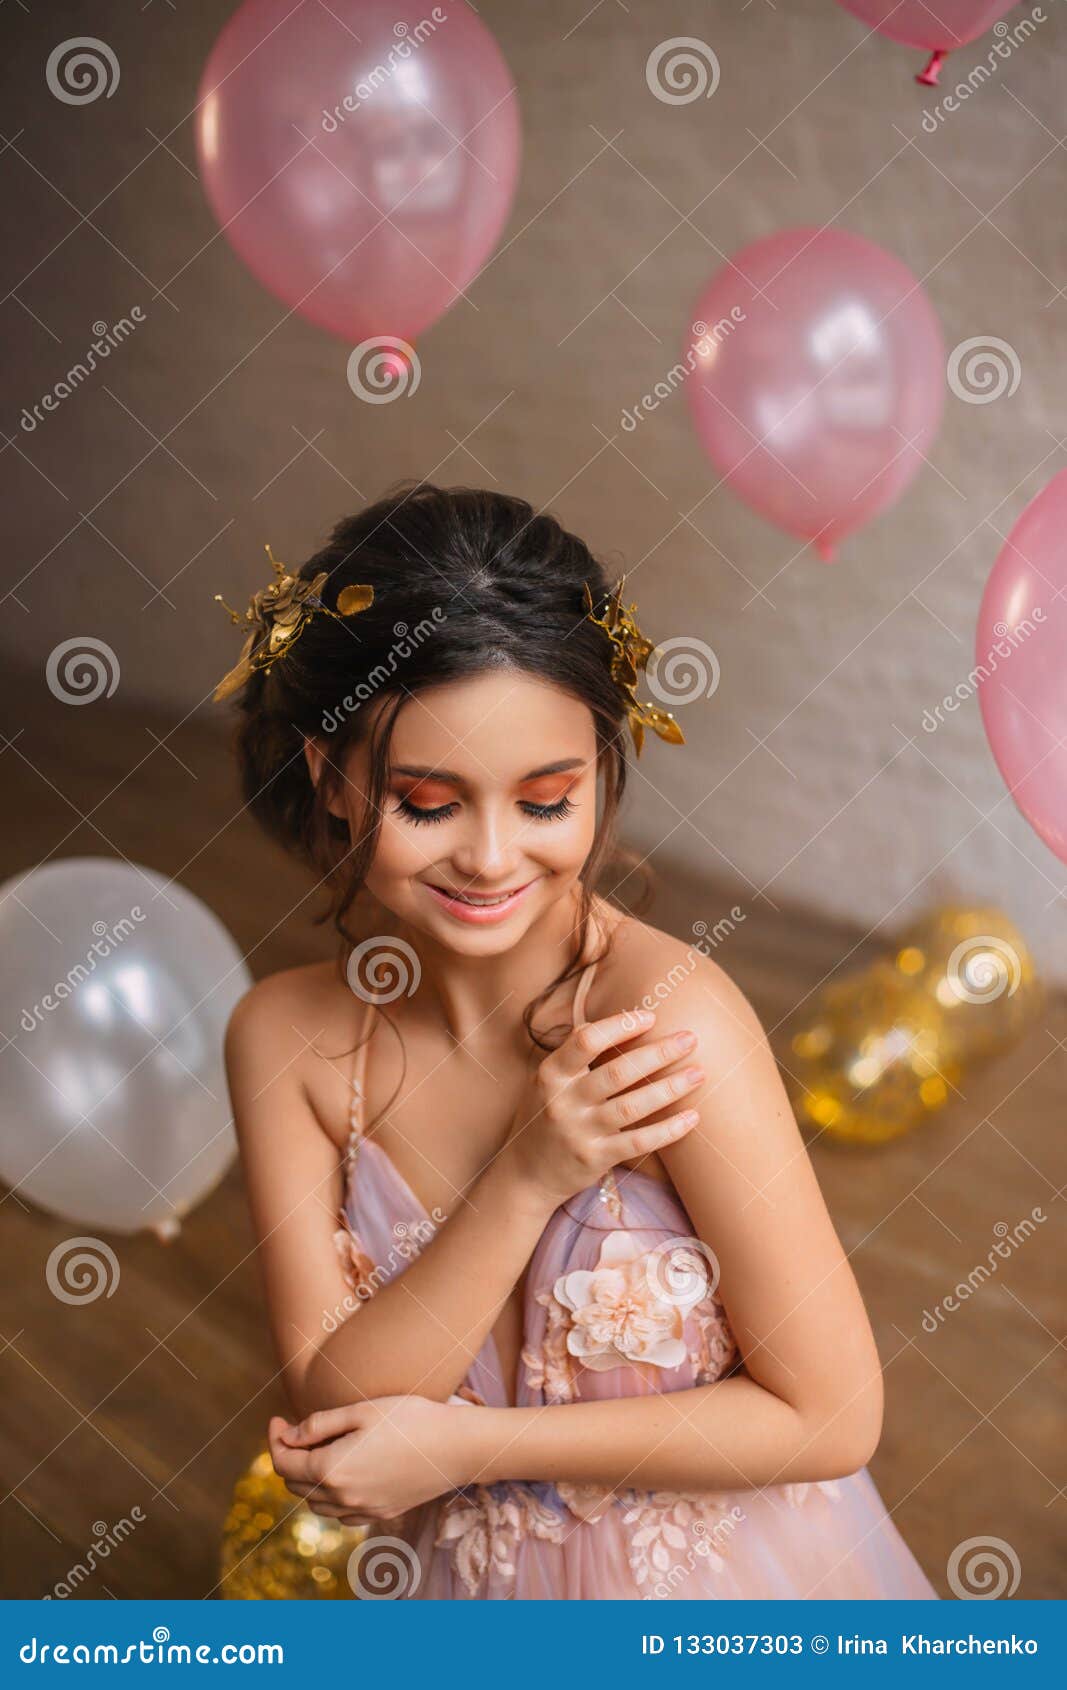 Cute Embarrassed Modest Petite Girl with Dark Hair and a Gold Rim Sits in a  Gorgeous Pink Peach Dress with Purple Color Stock Image - Image of balloon,  hair: 133037303